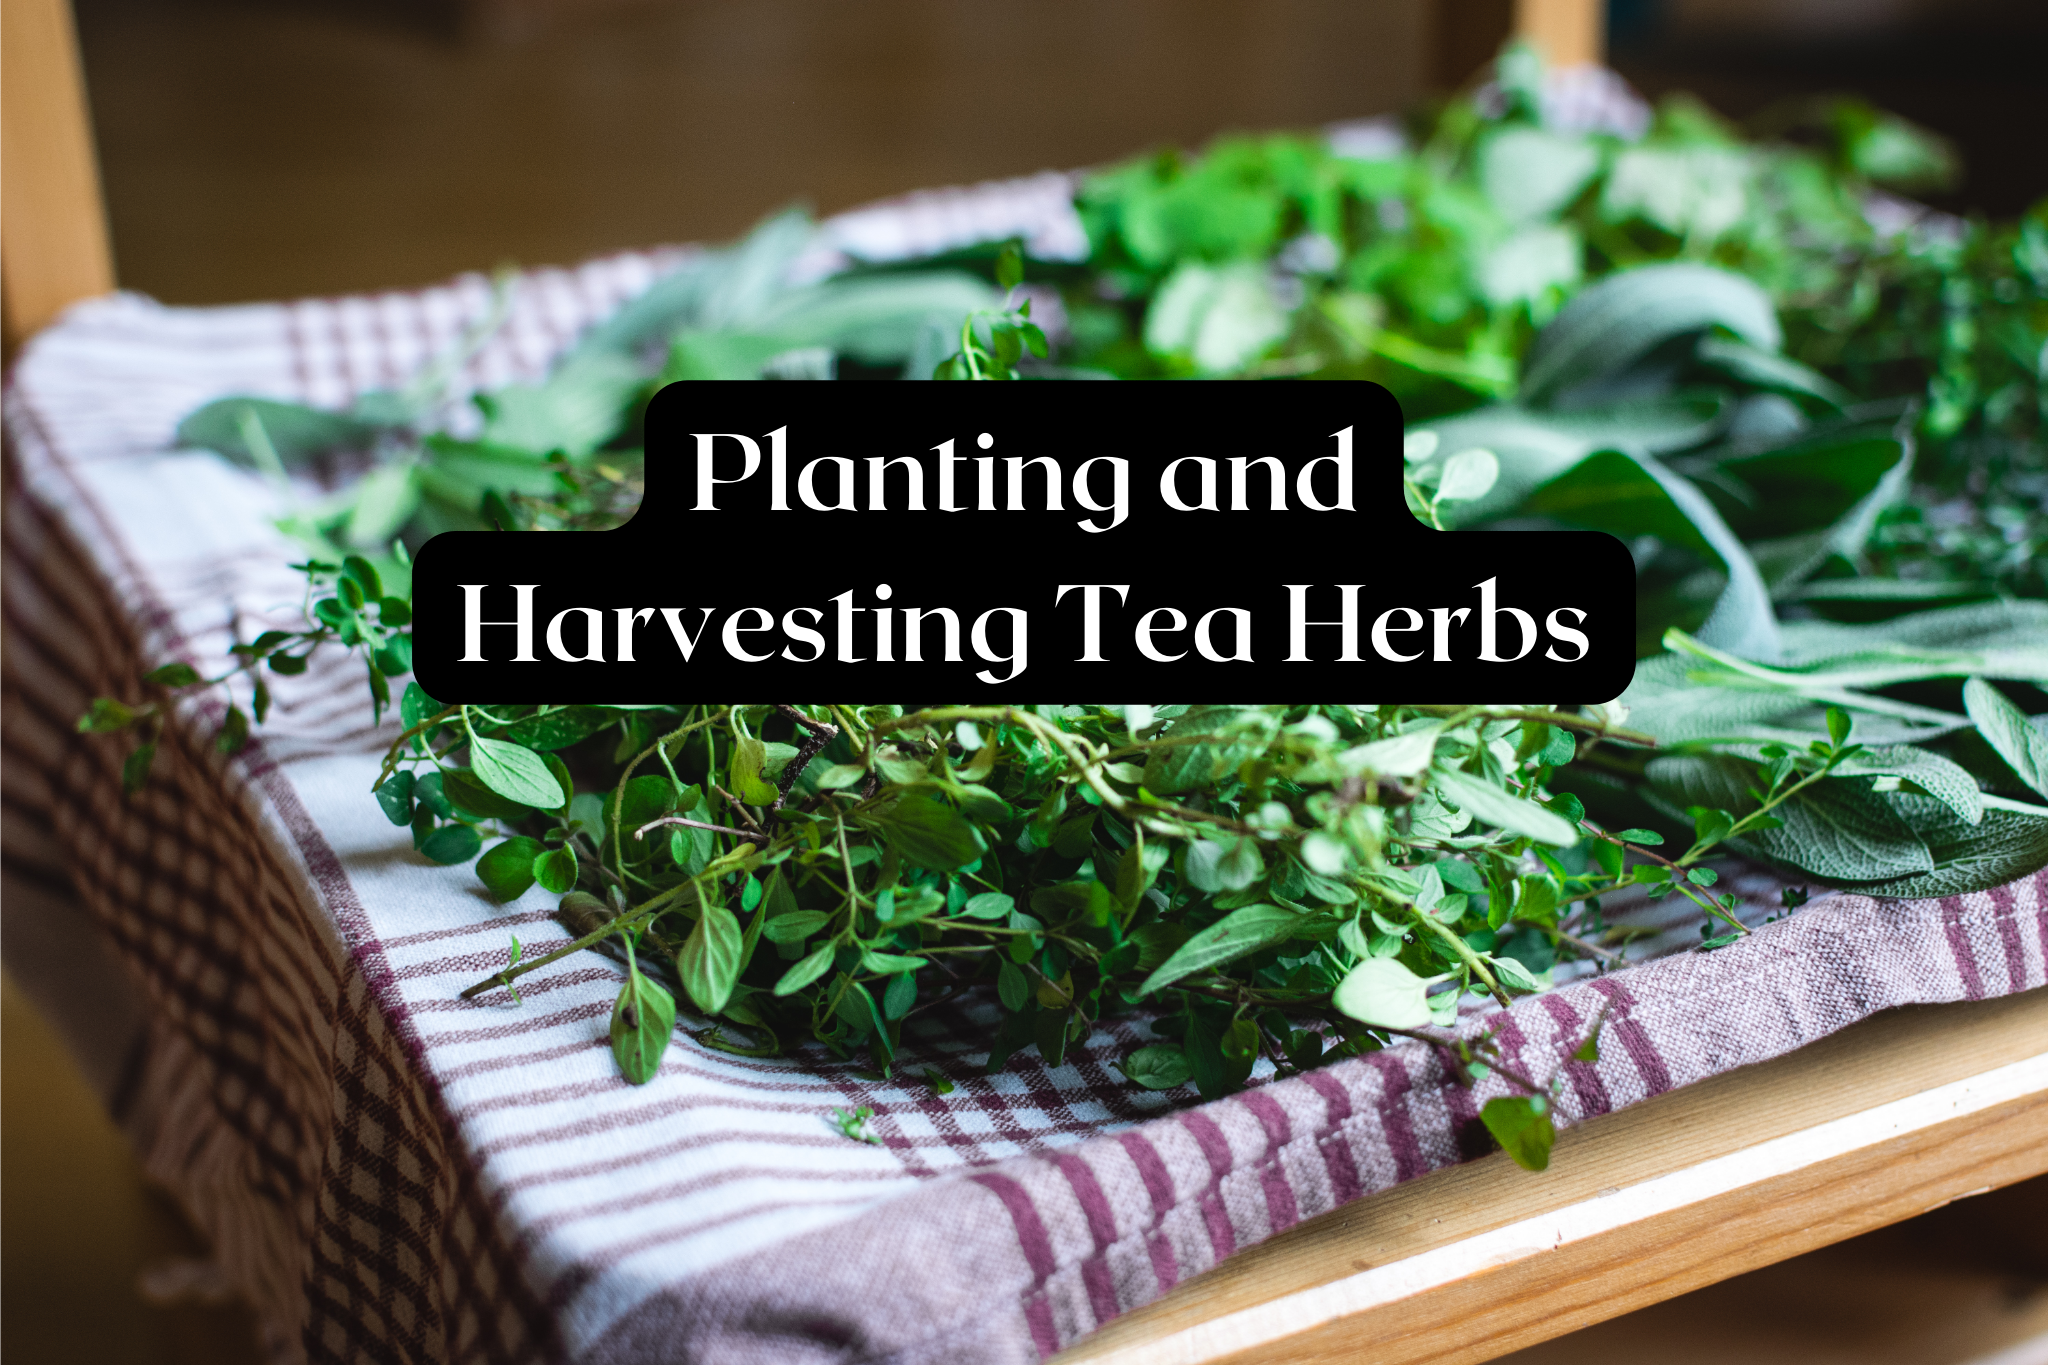 Planting and Harvesting Tea Herbs, 1 awesome idea